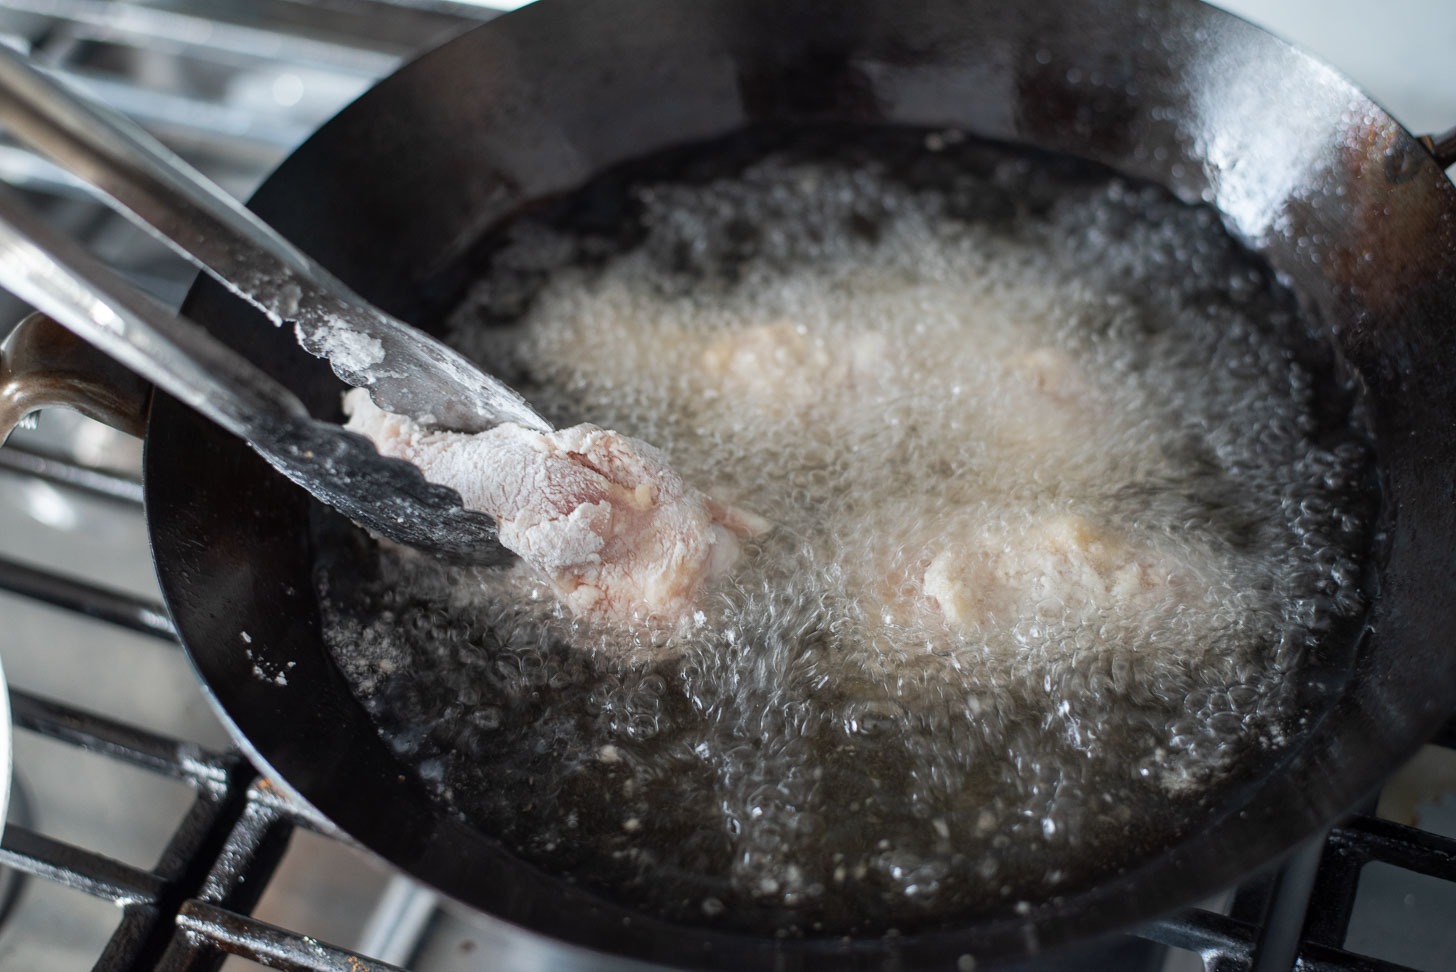 Chicken wings enters hot oil for deep frying.